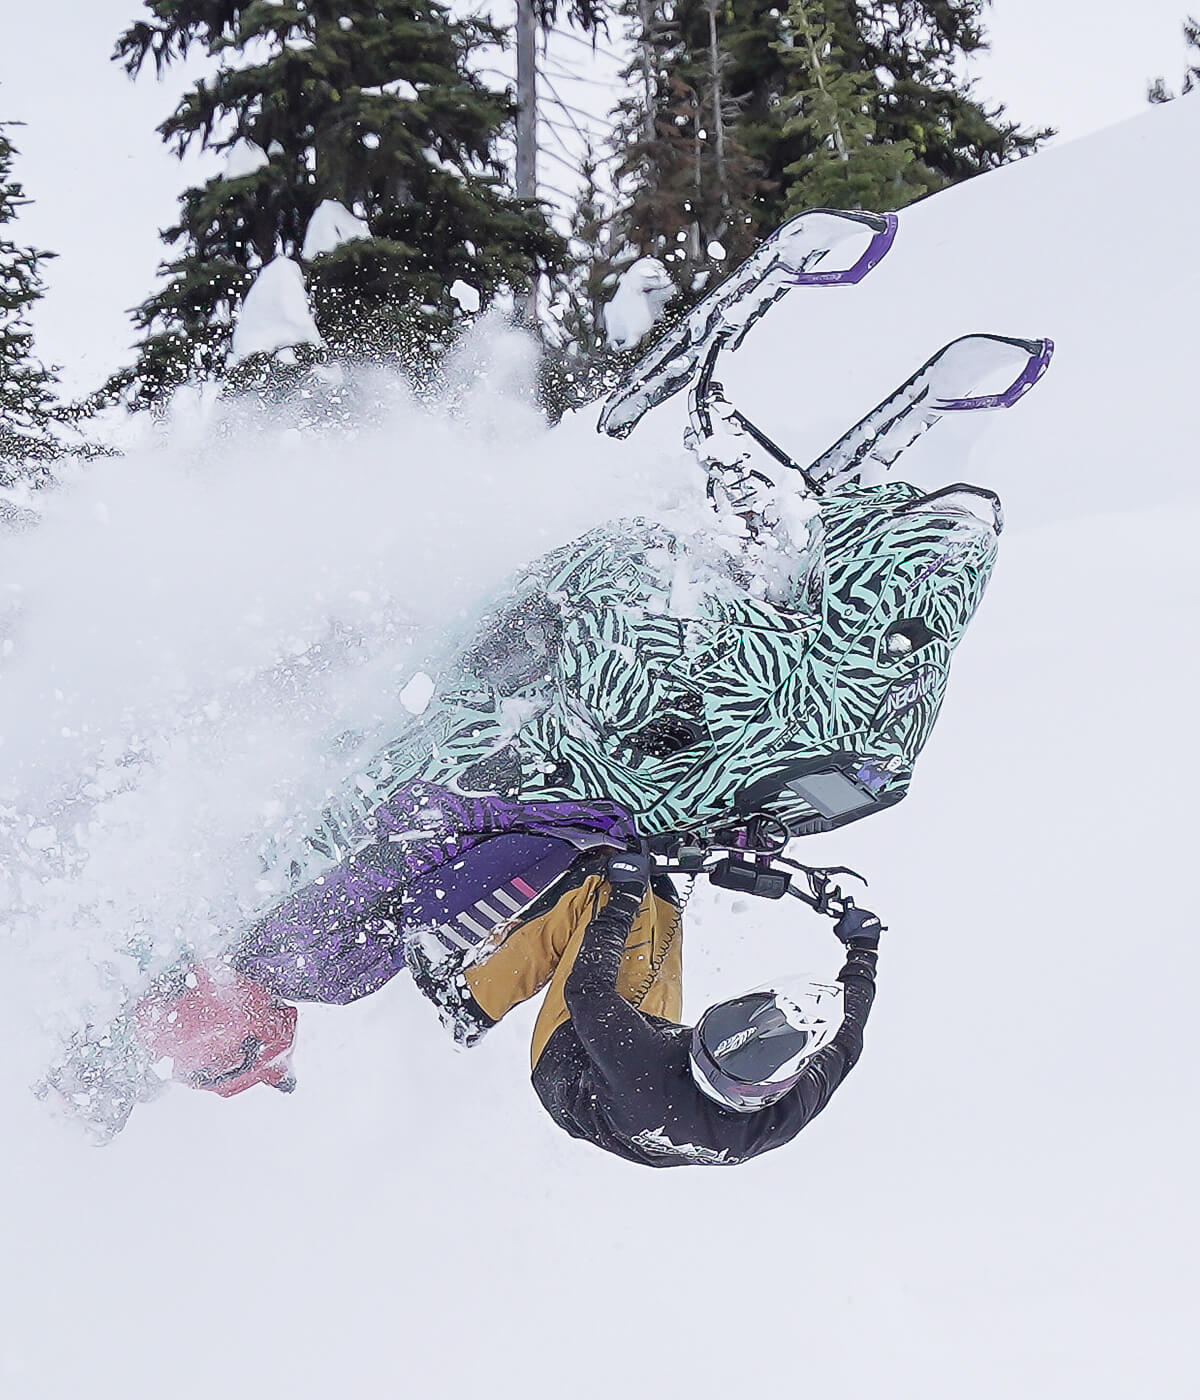 C&A Pro backcountry rider Hayden Throop doing a flip on a snowmobile in the mountains with black TMX mountain skis with purple handles